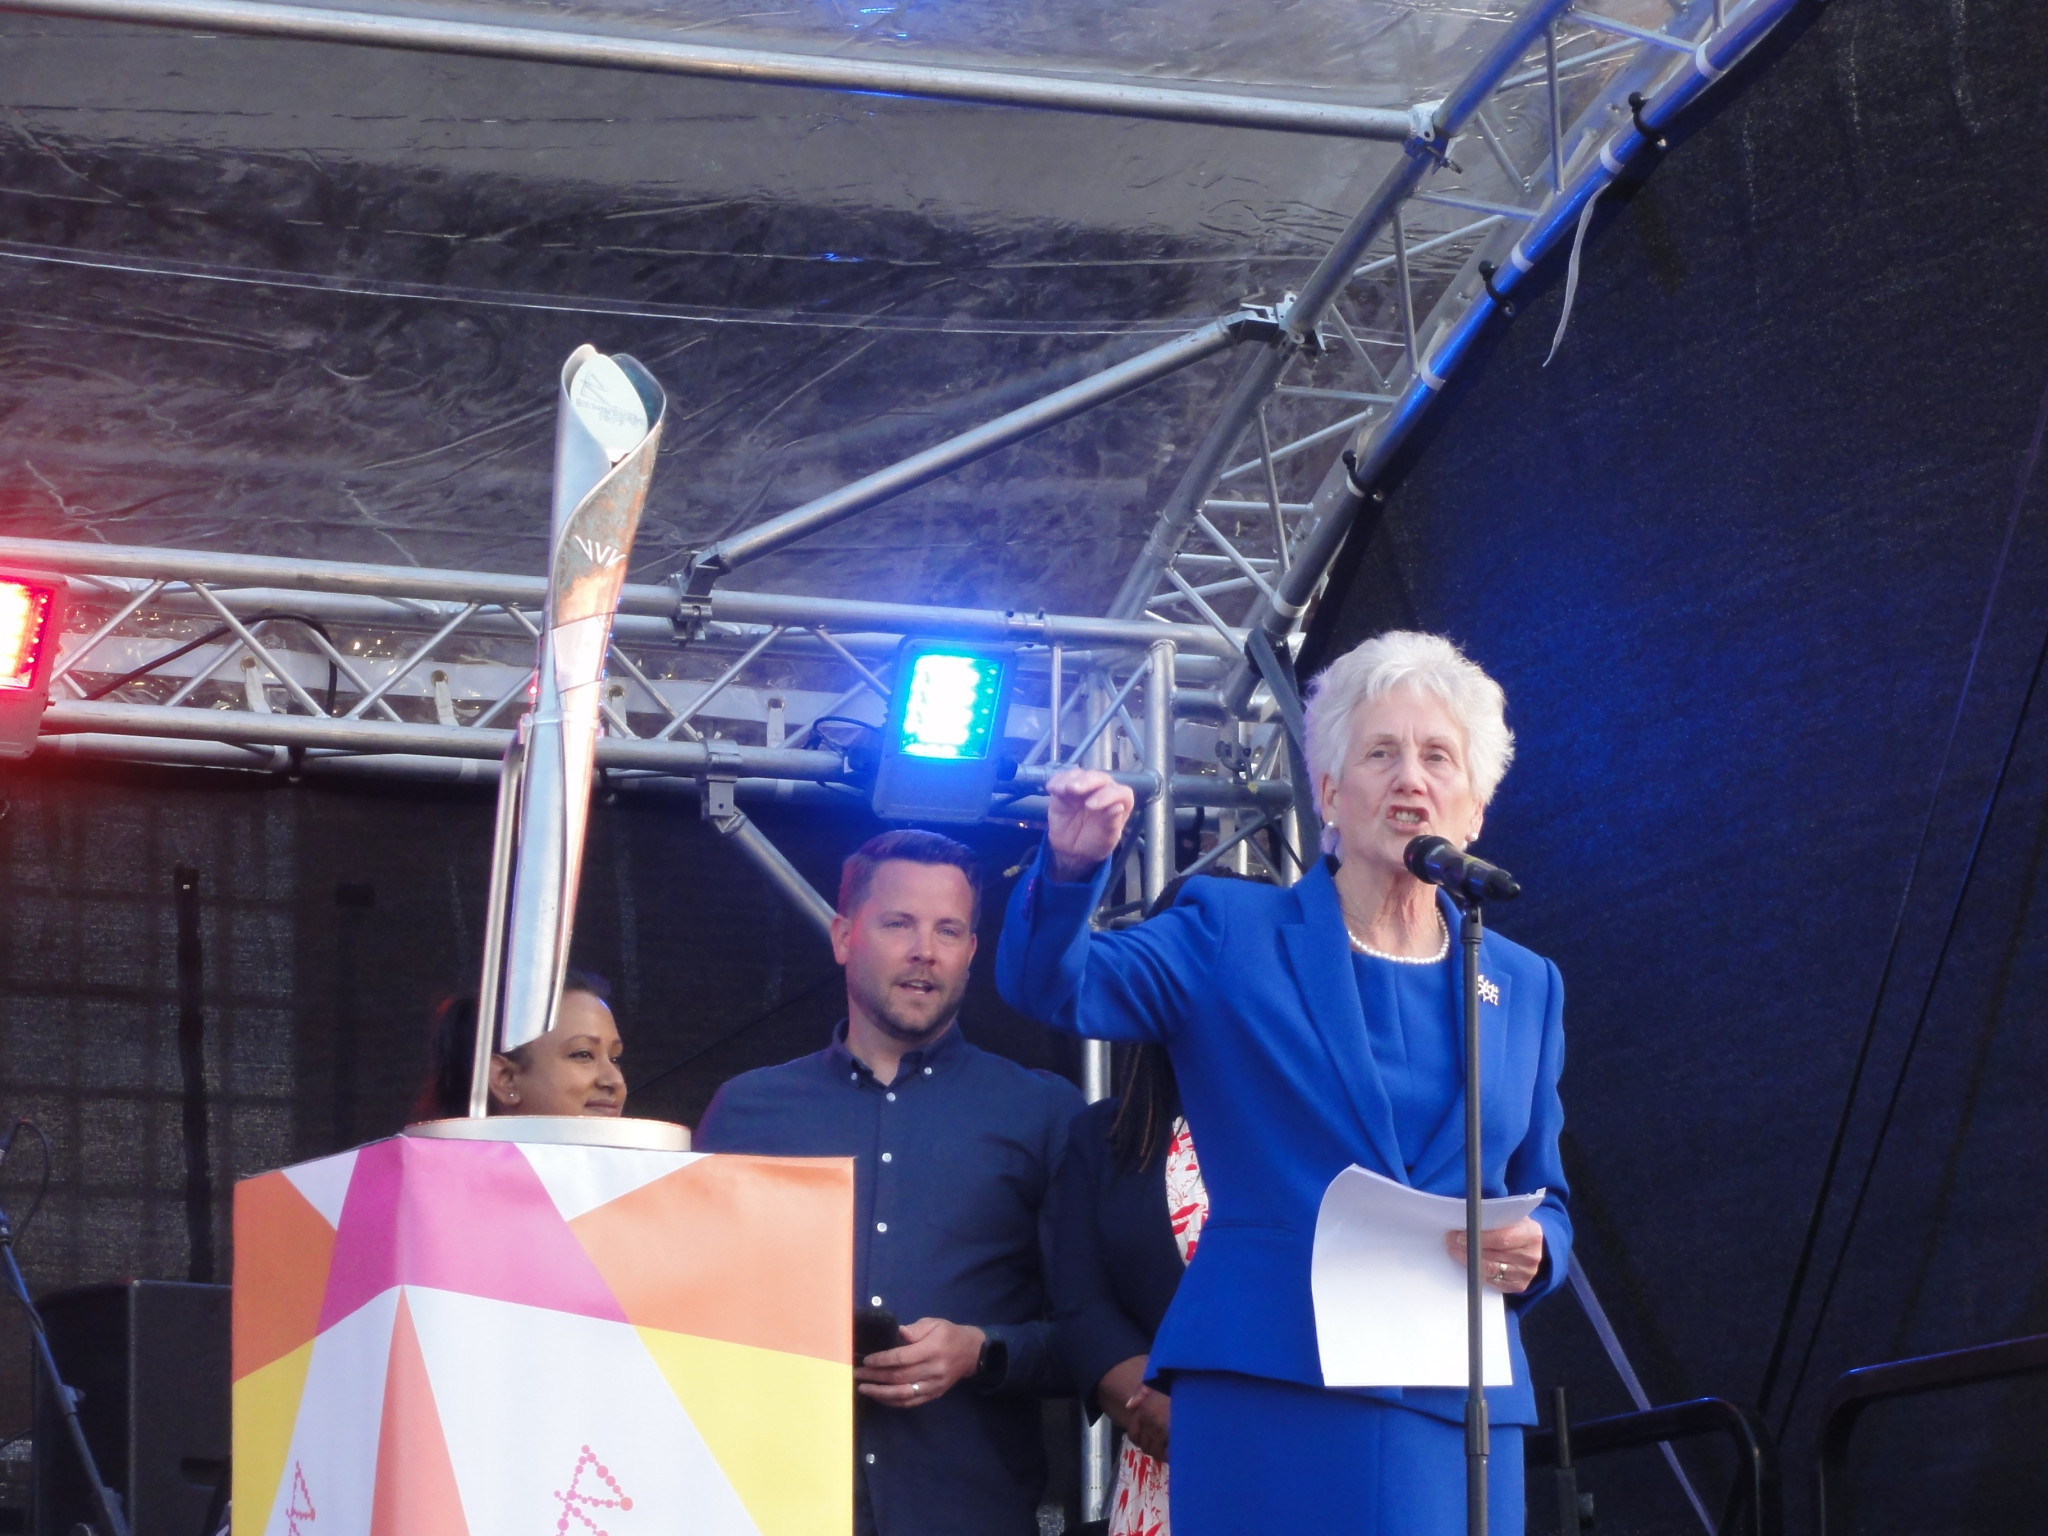 The Baton was greeted by Commonwealth Games Federation President Louise Martin who said its original itinerary had been changed to bring it to London for the Platinum Jubilee ©ITG